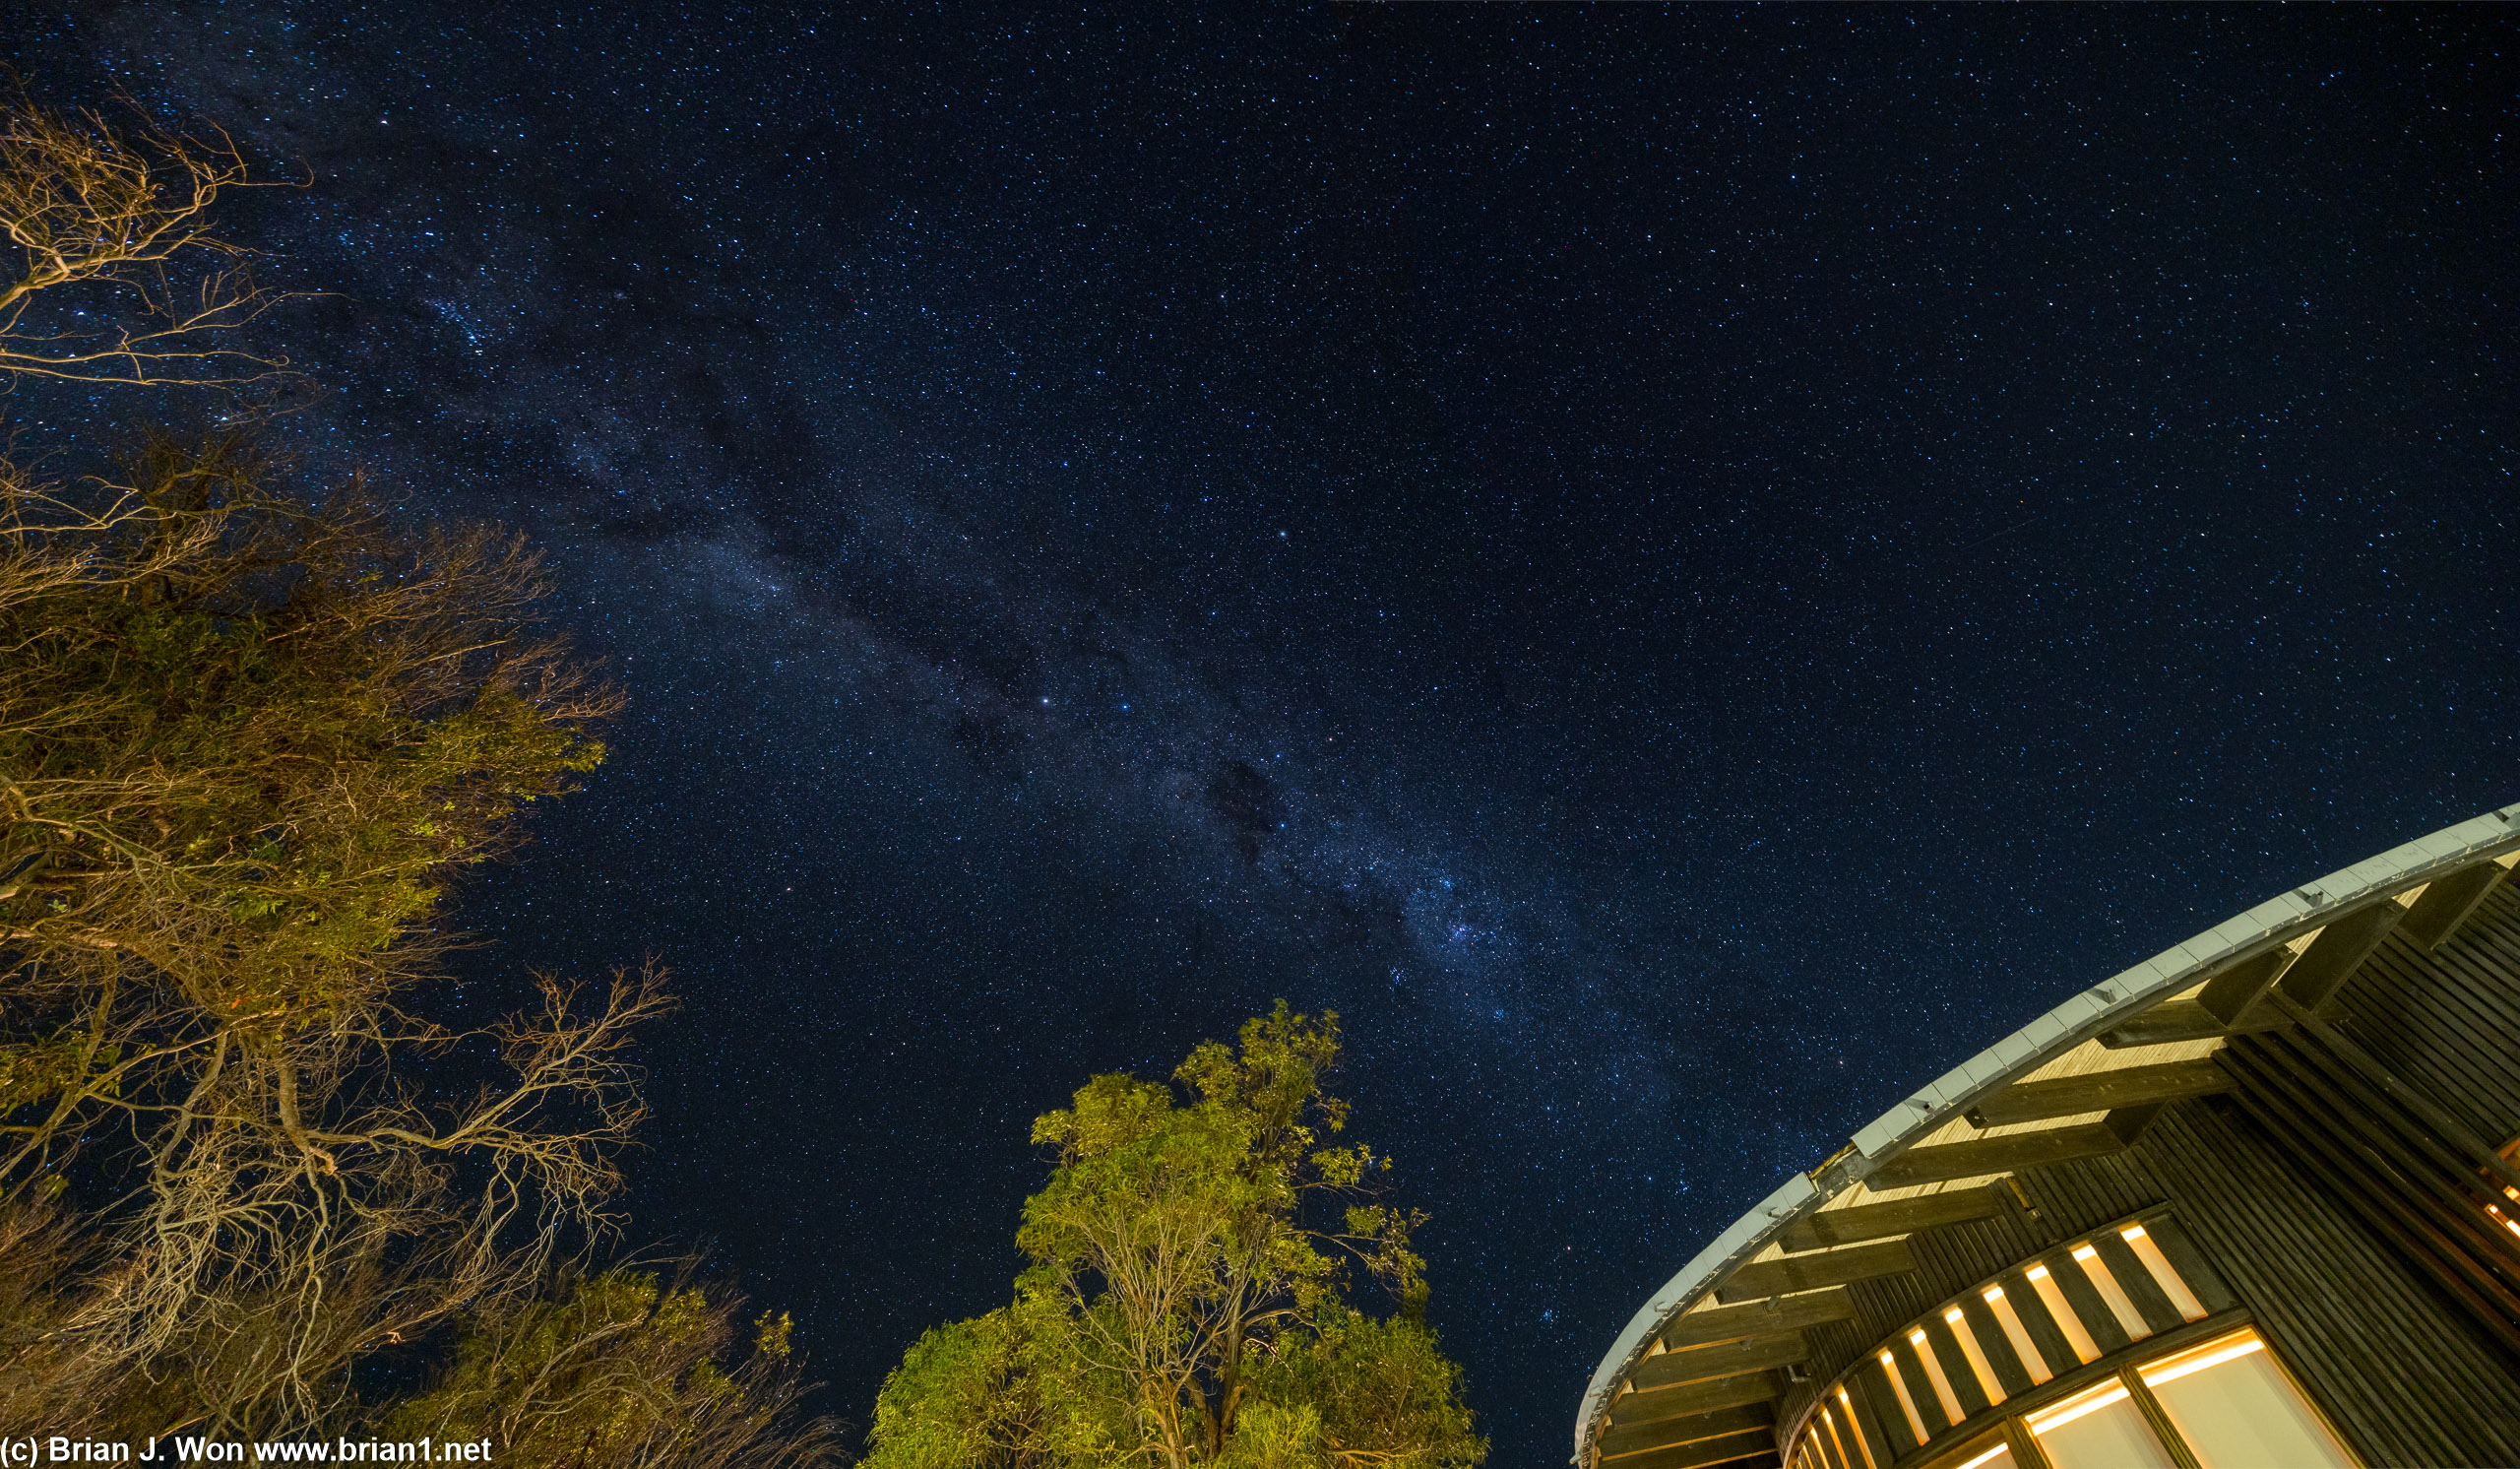 The galactic center visible over lights and trees of the hotel.